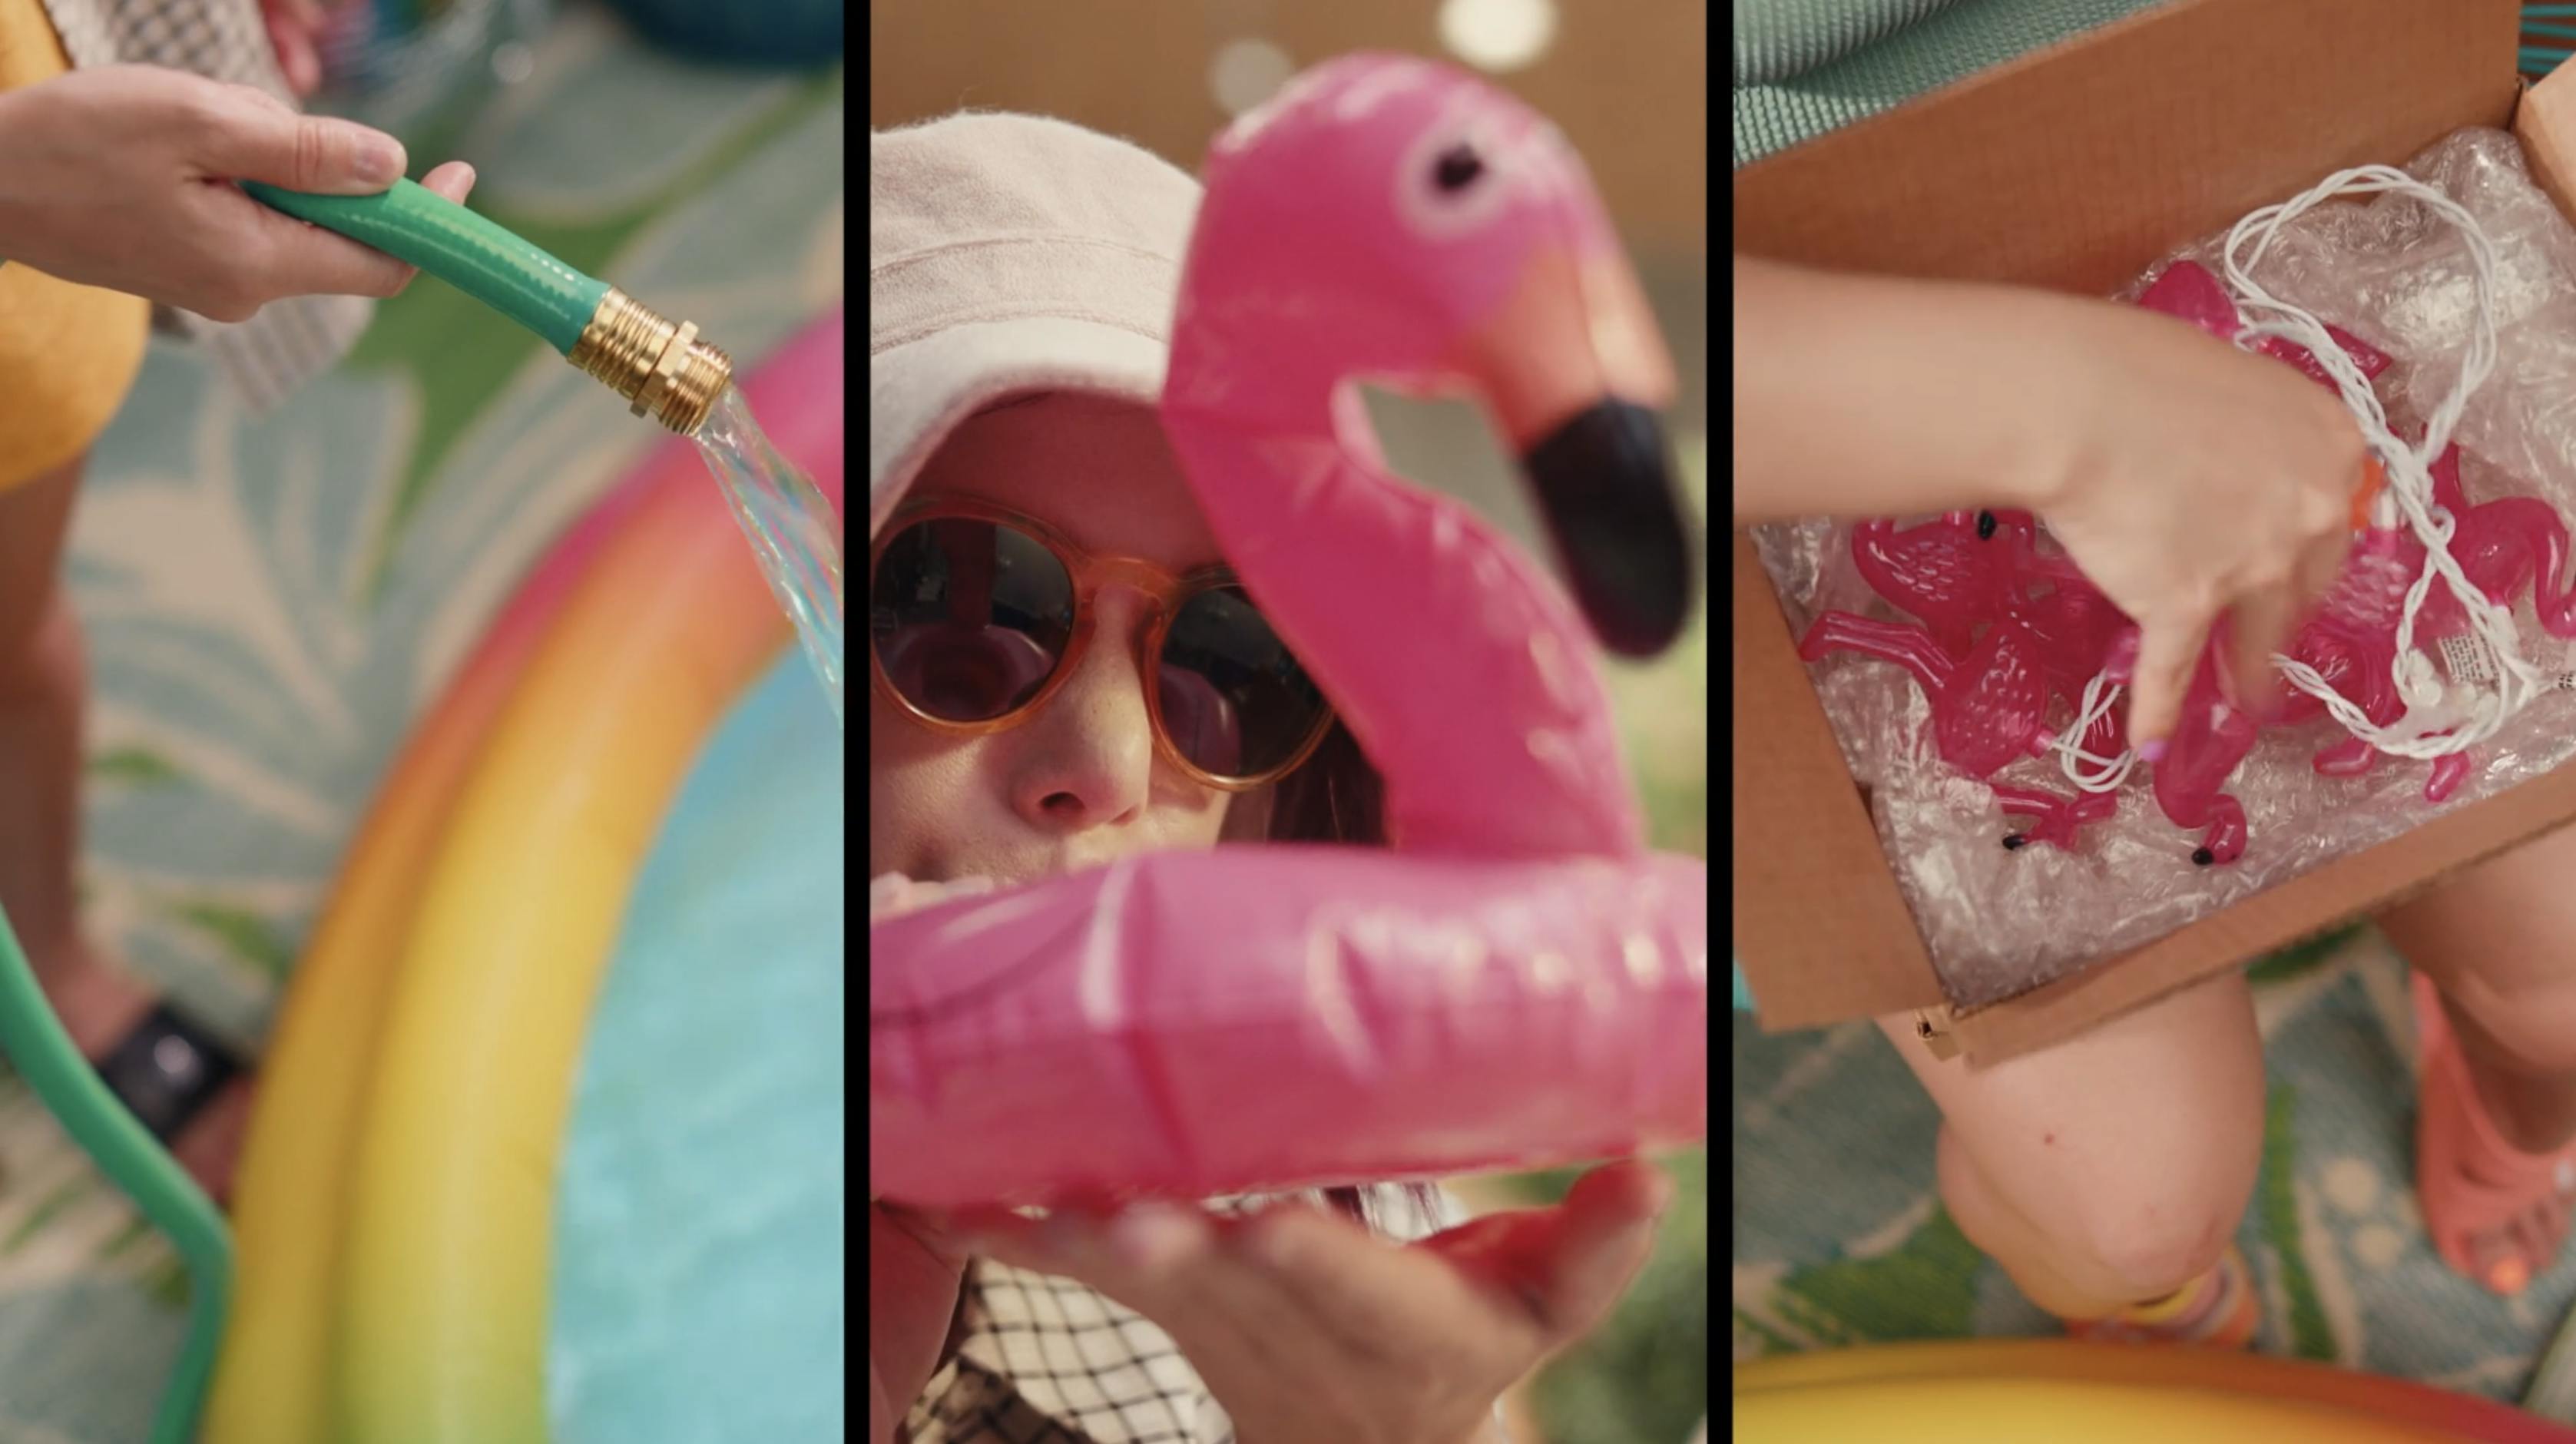 A triptych of three photos: a hose with water, a pink inflatable flamingo, and a box of pink lights